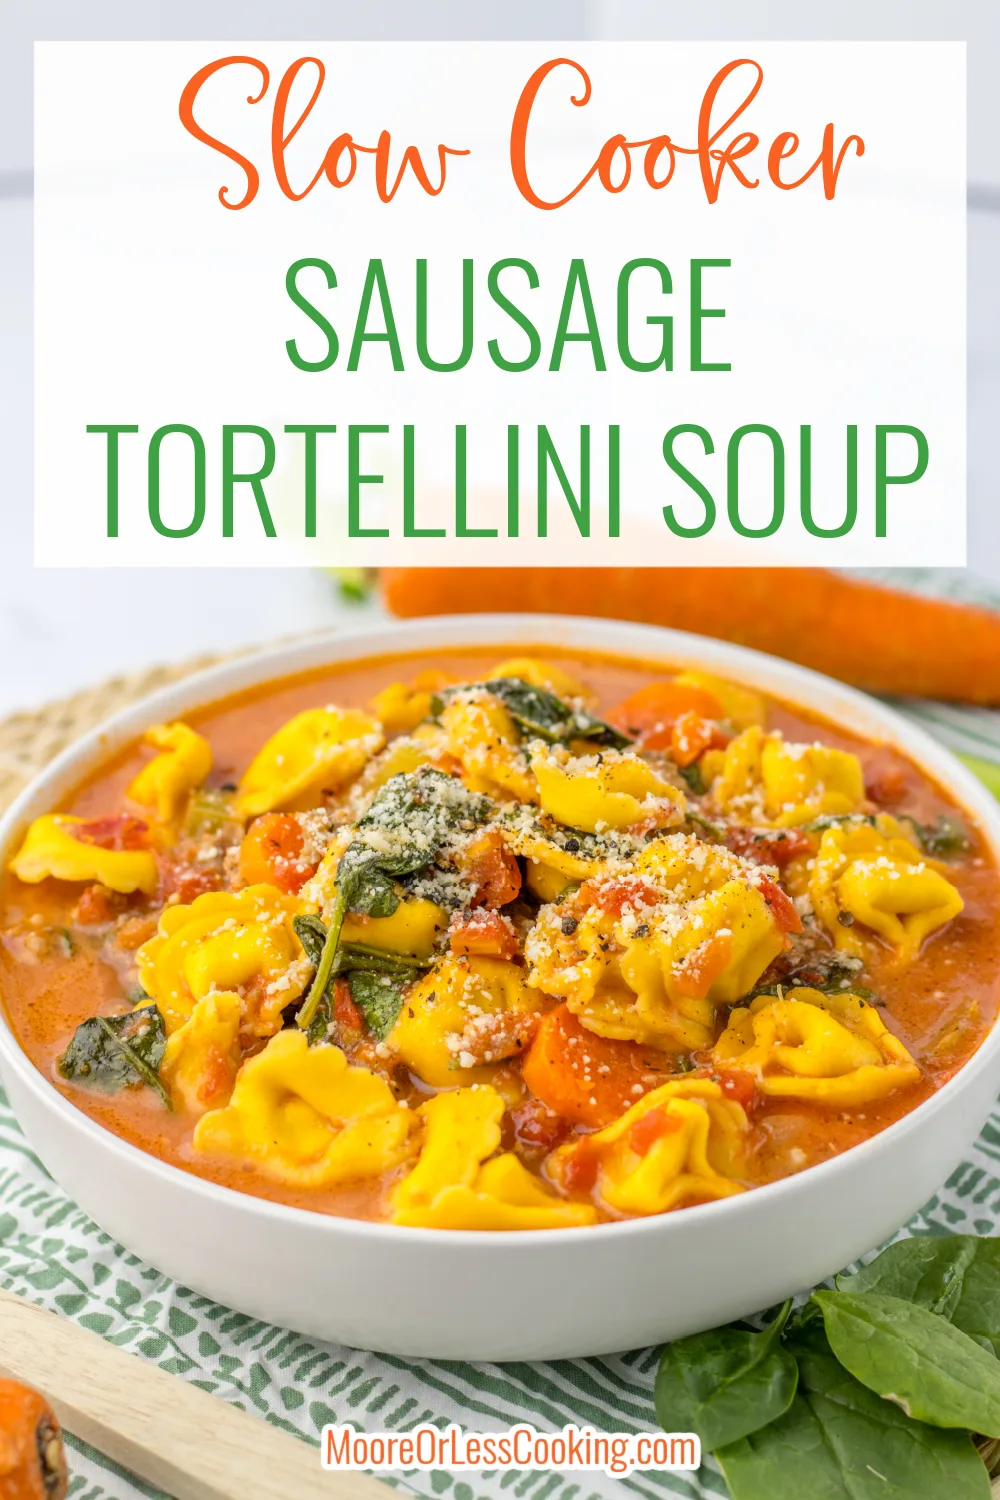 Savory and full of outrageous flavor, Slow Cooker Sausage Tortellini Soup is the pasta dinner you want to make when you're looking for a filling and satisfying meal. This tortellini and sausage soup is cooked slowly in a creamy tomato and chicken broth base that's full of veggies like carrots, onion, celery, garlic and more. With minimal prep, you'll let your slow cooker do all the work for this delicious soup that's always a family favorite. via @Mooreorlesscook